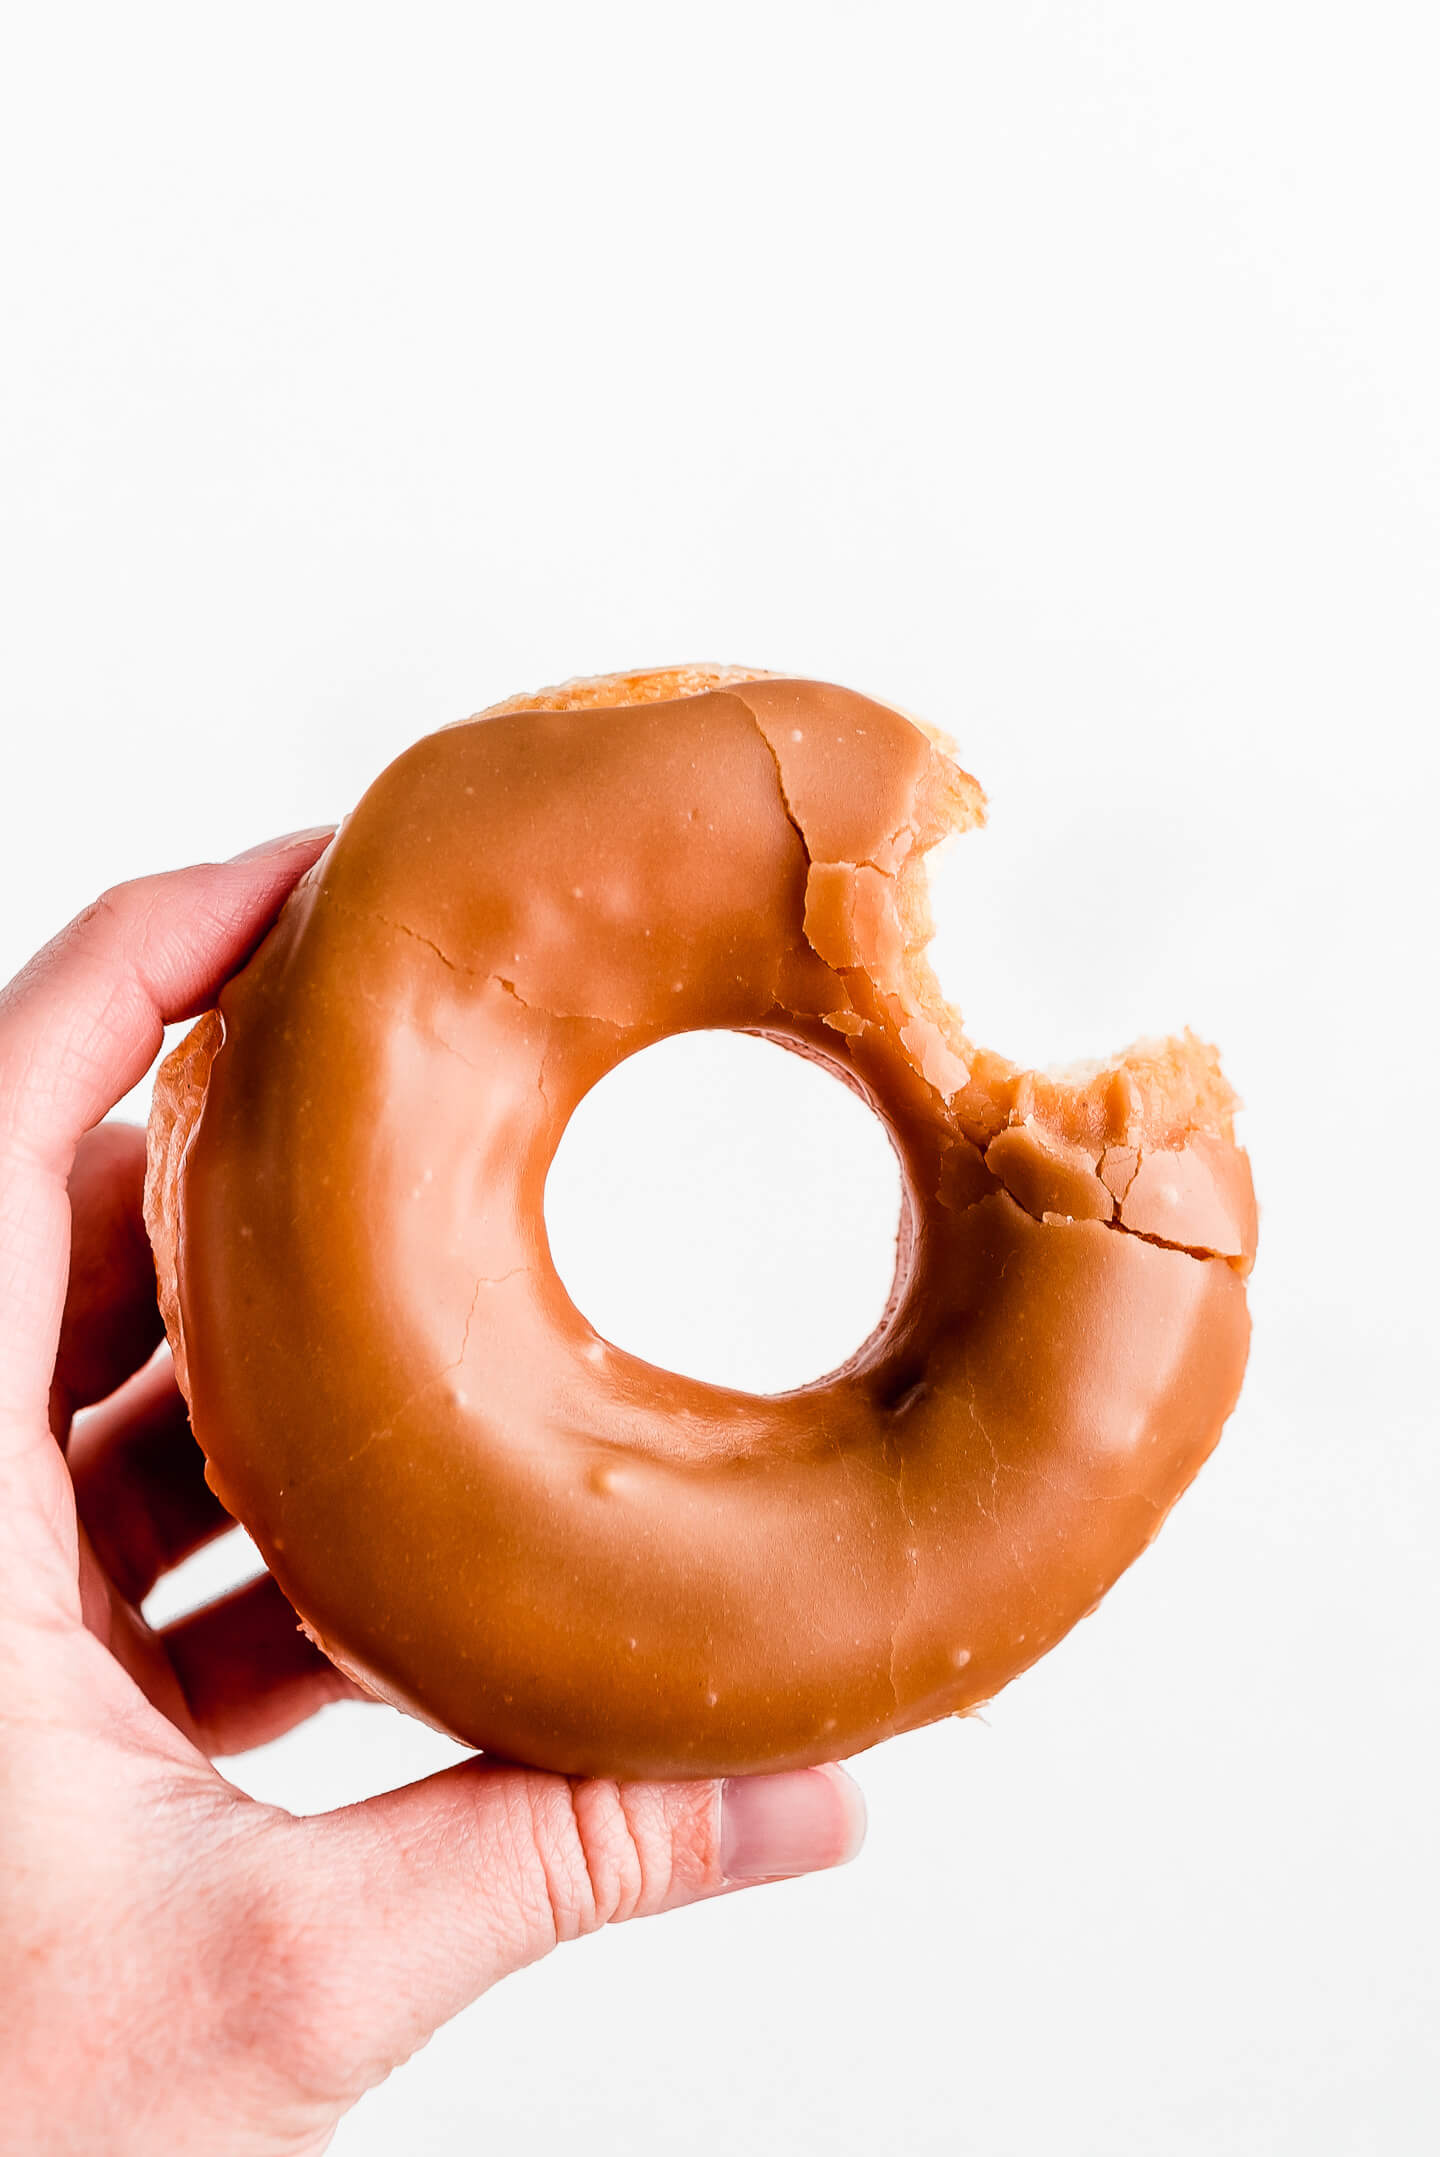 A hand holding up a Maple Donut with a bite taken out.